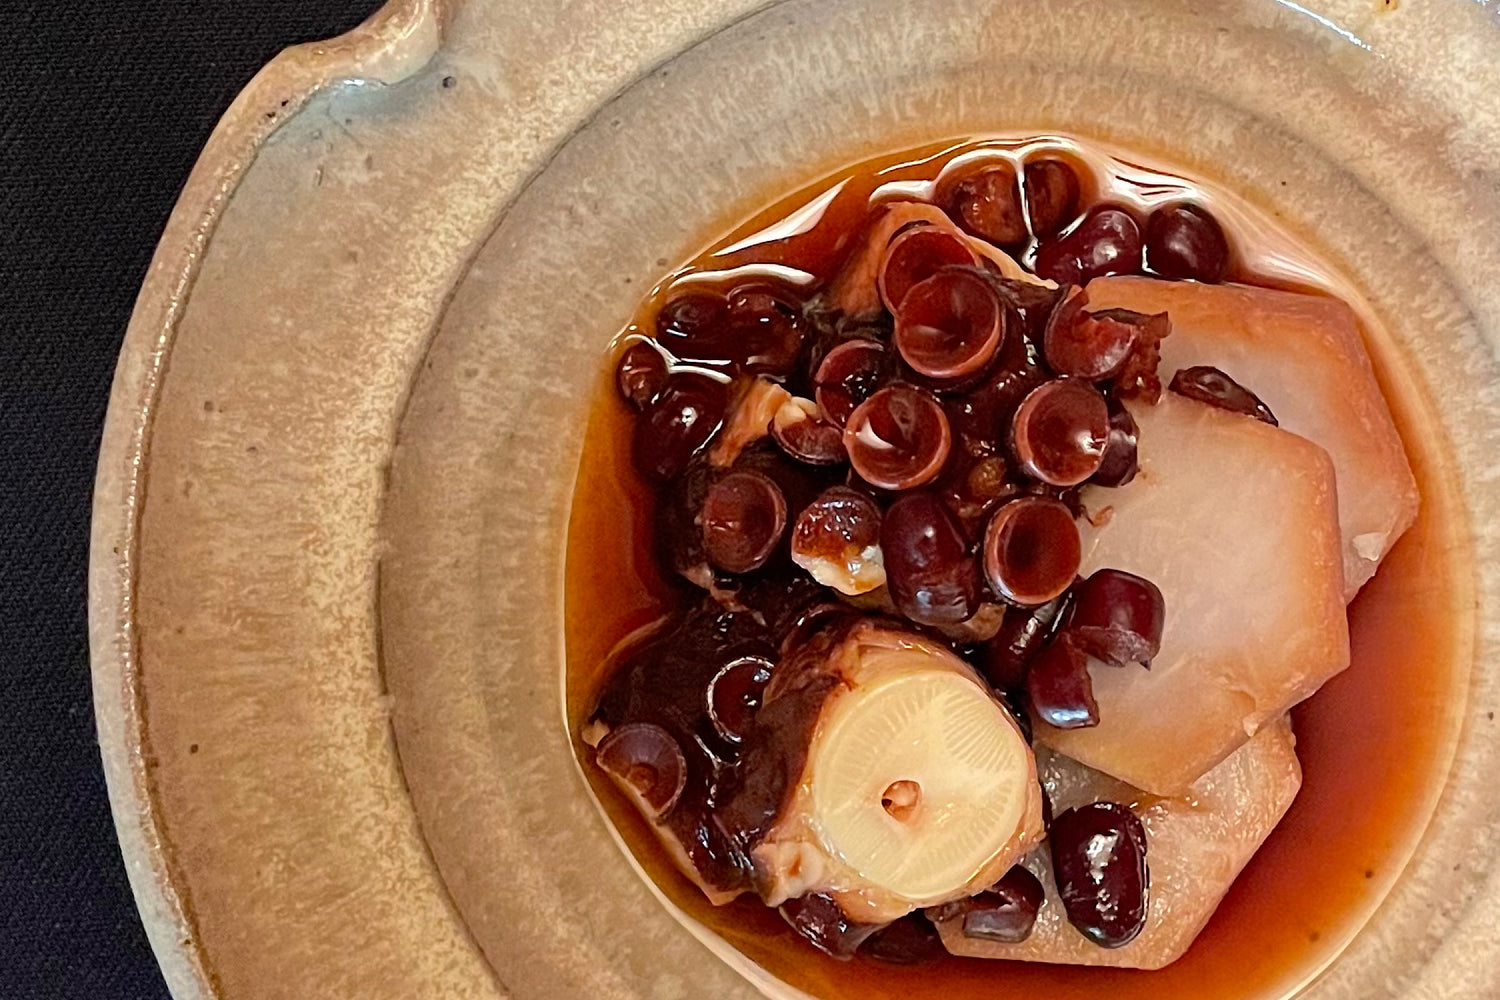 Octopus and taro simmered in azuki beans